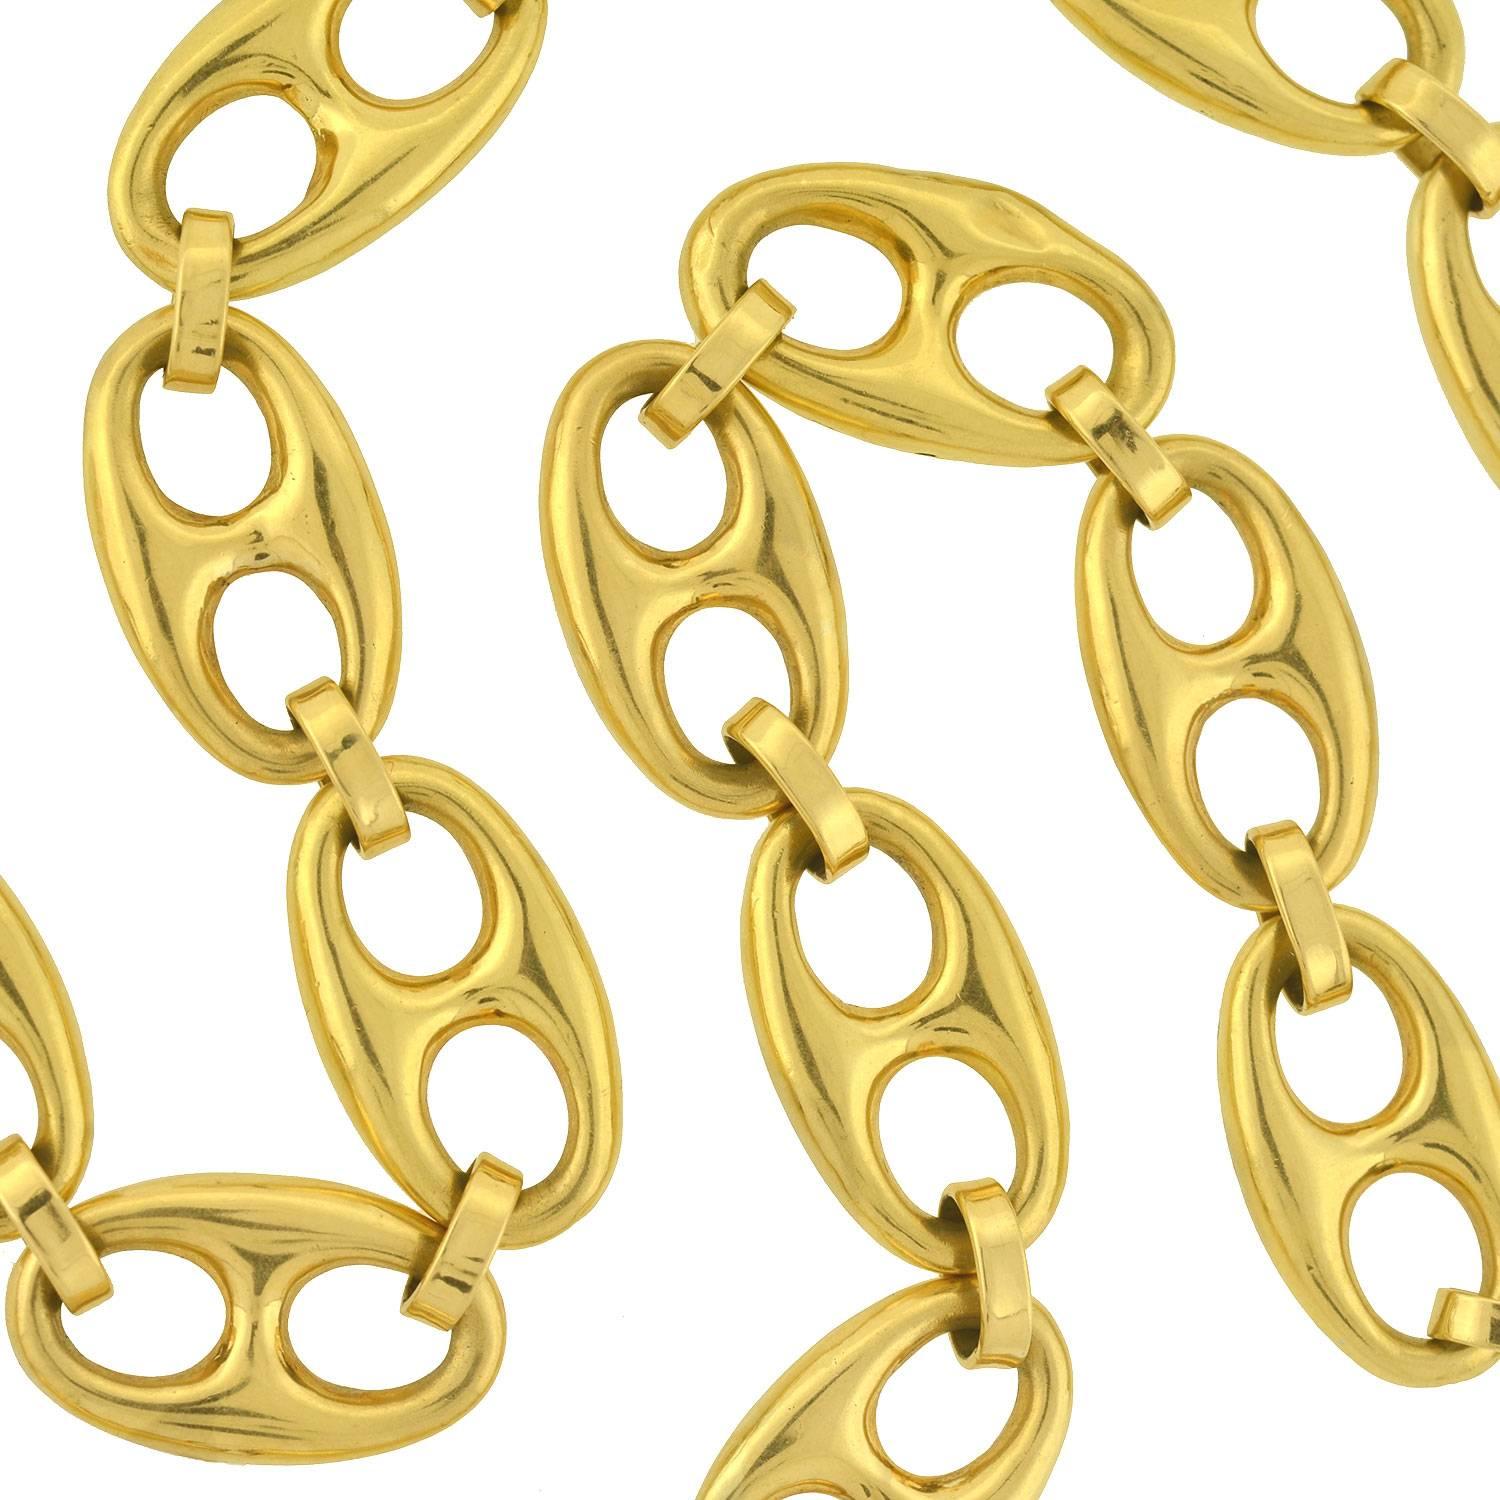 This stylish estate necklace has a classic anchor link design! This substantial necklace is made of solid 18kt gold, and is comprised of large anchor links (also called "mariner links") that alternate with loop connectors, forming a